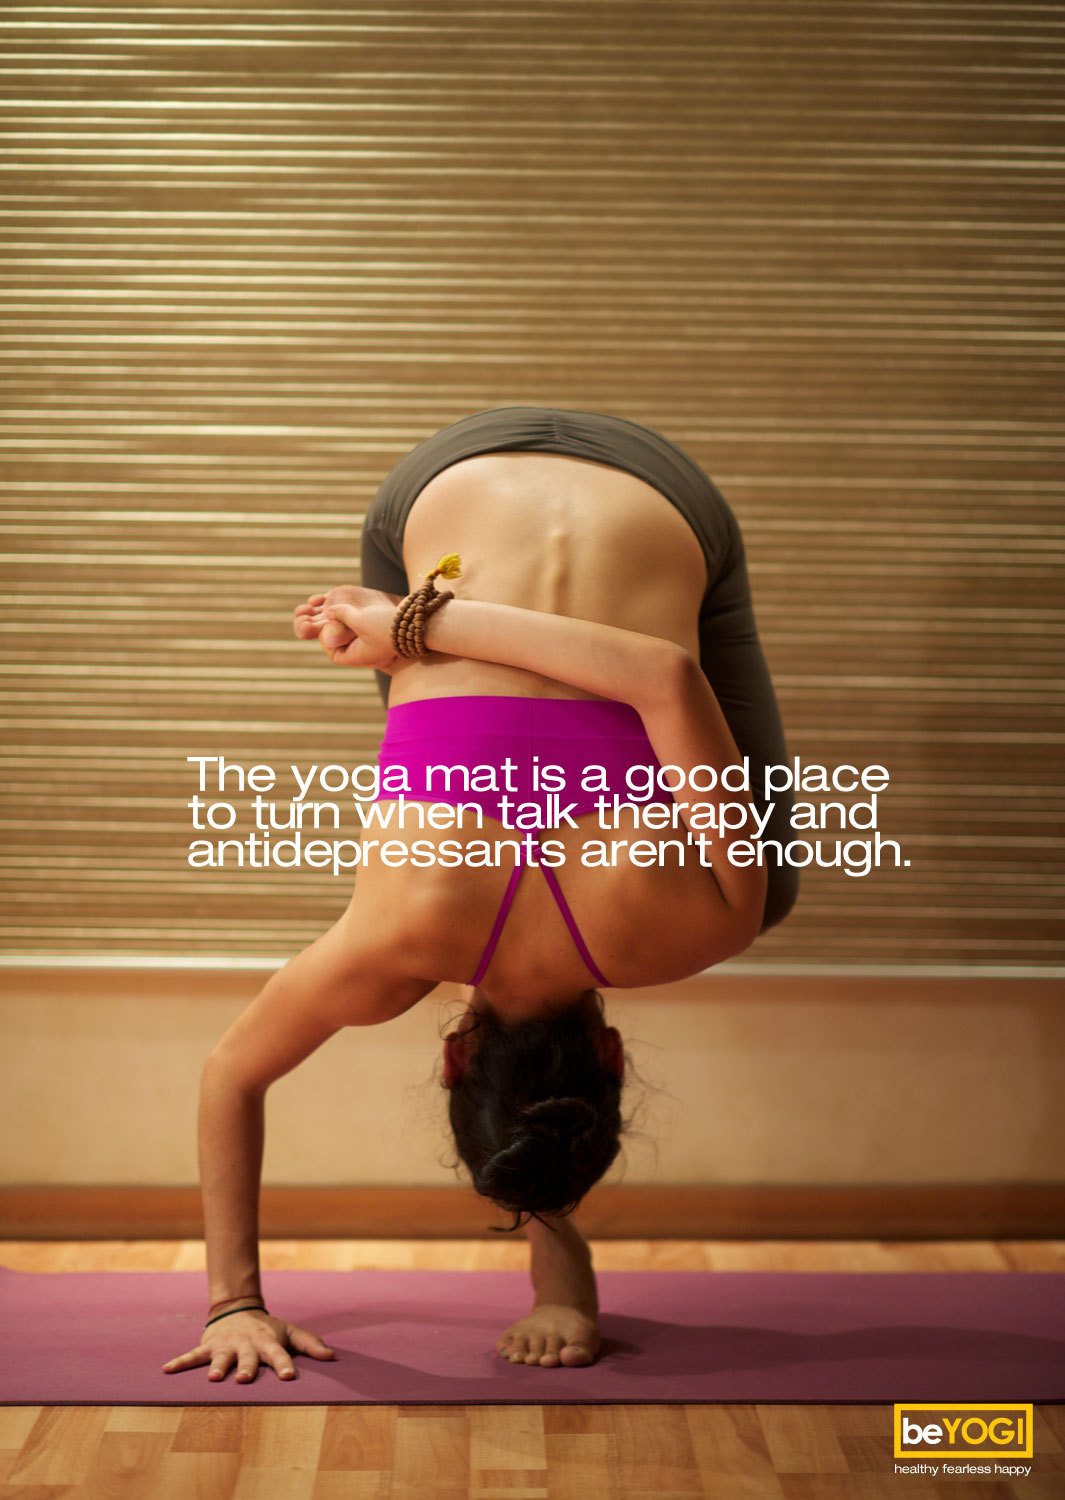 brendayoga:

The yoga mat is a good place to turn when talk therapy and antidepressants aren’t enough.